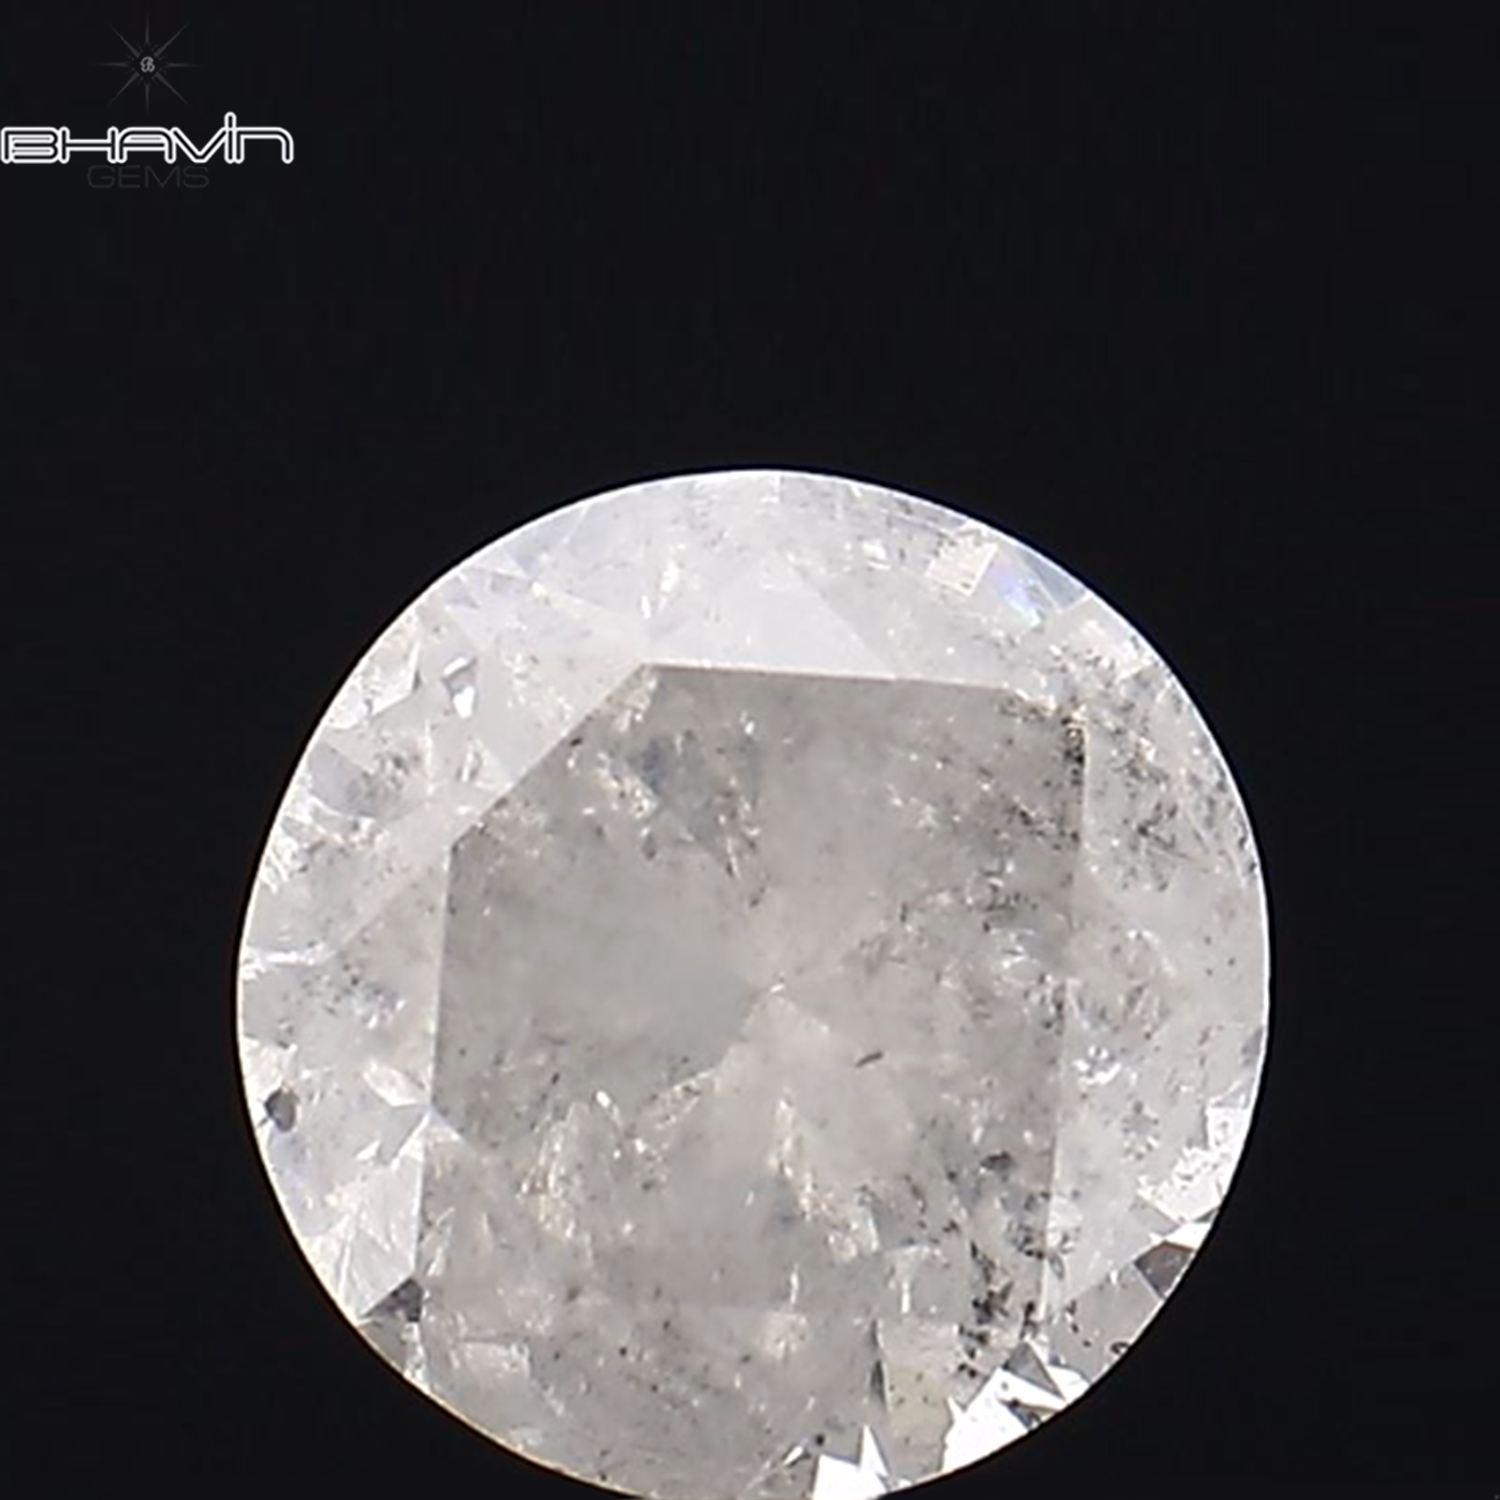 1.06 CT Round Shape Natural Loose Diamond White Color I3 Clarity (6.38 MM)